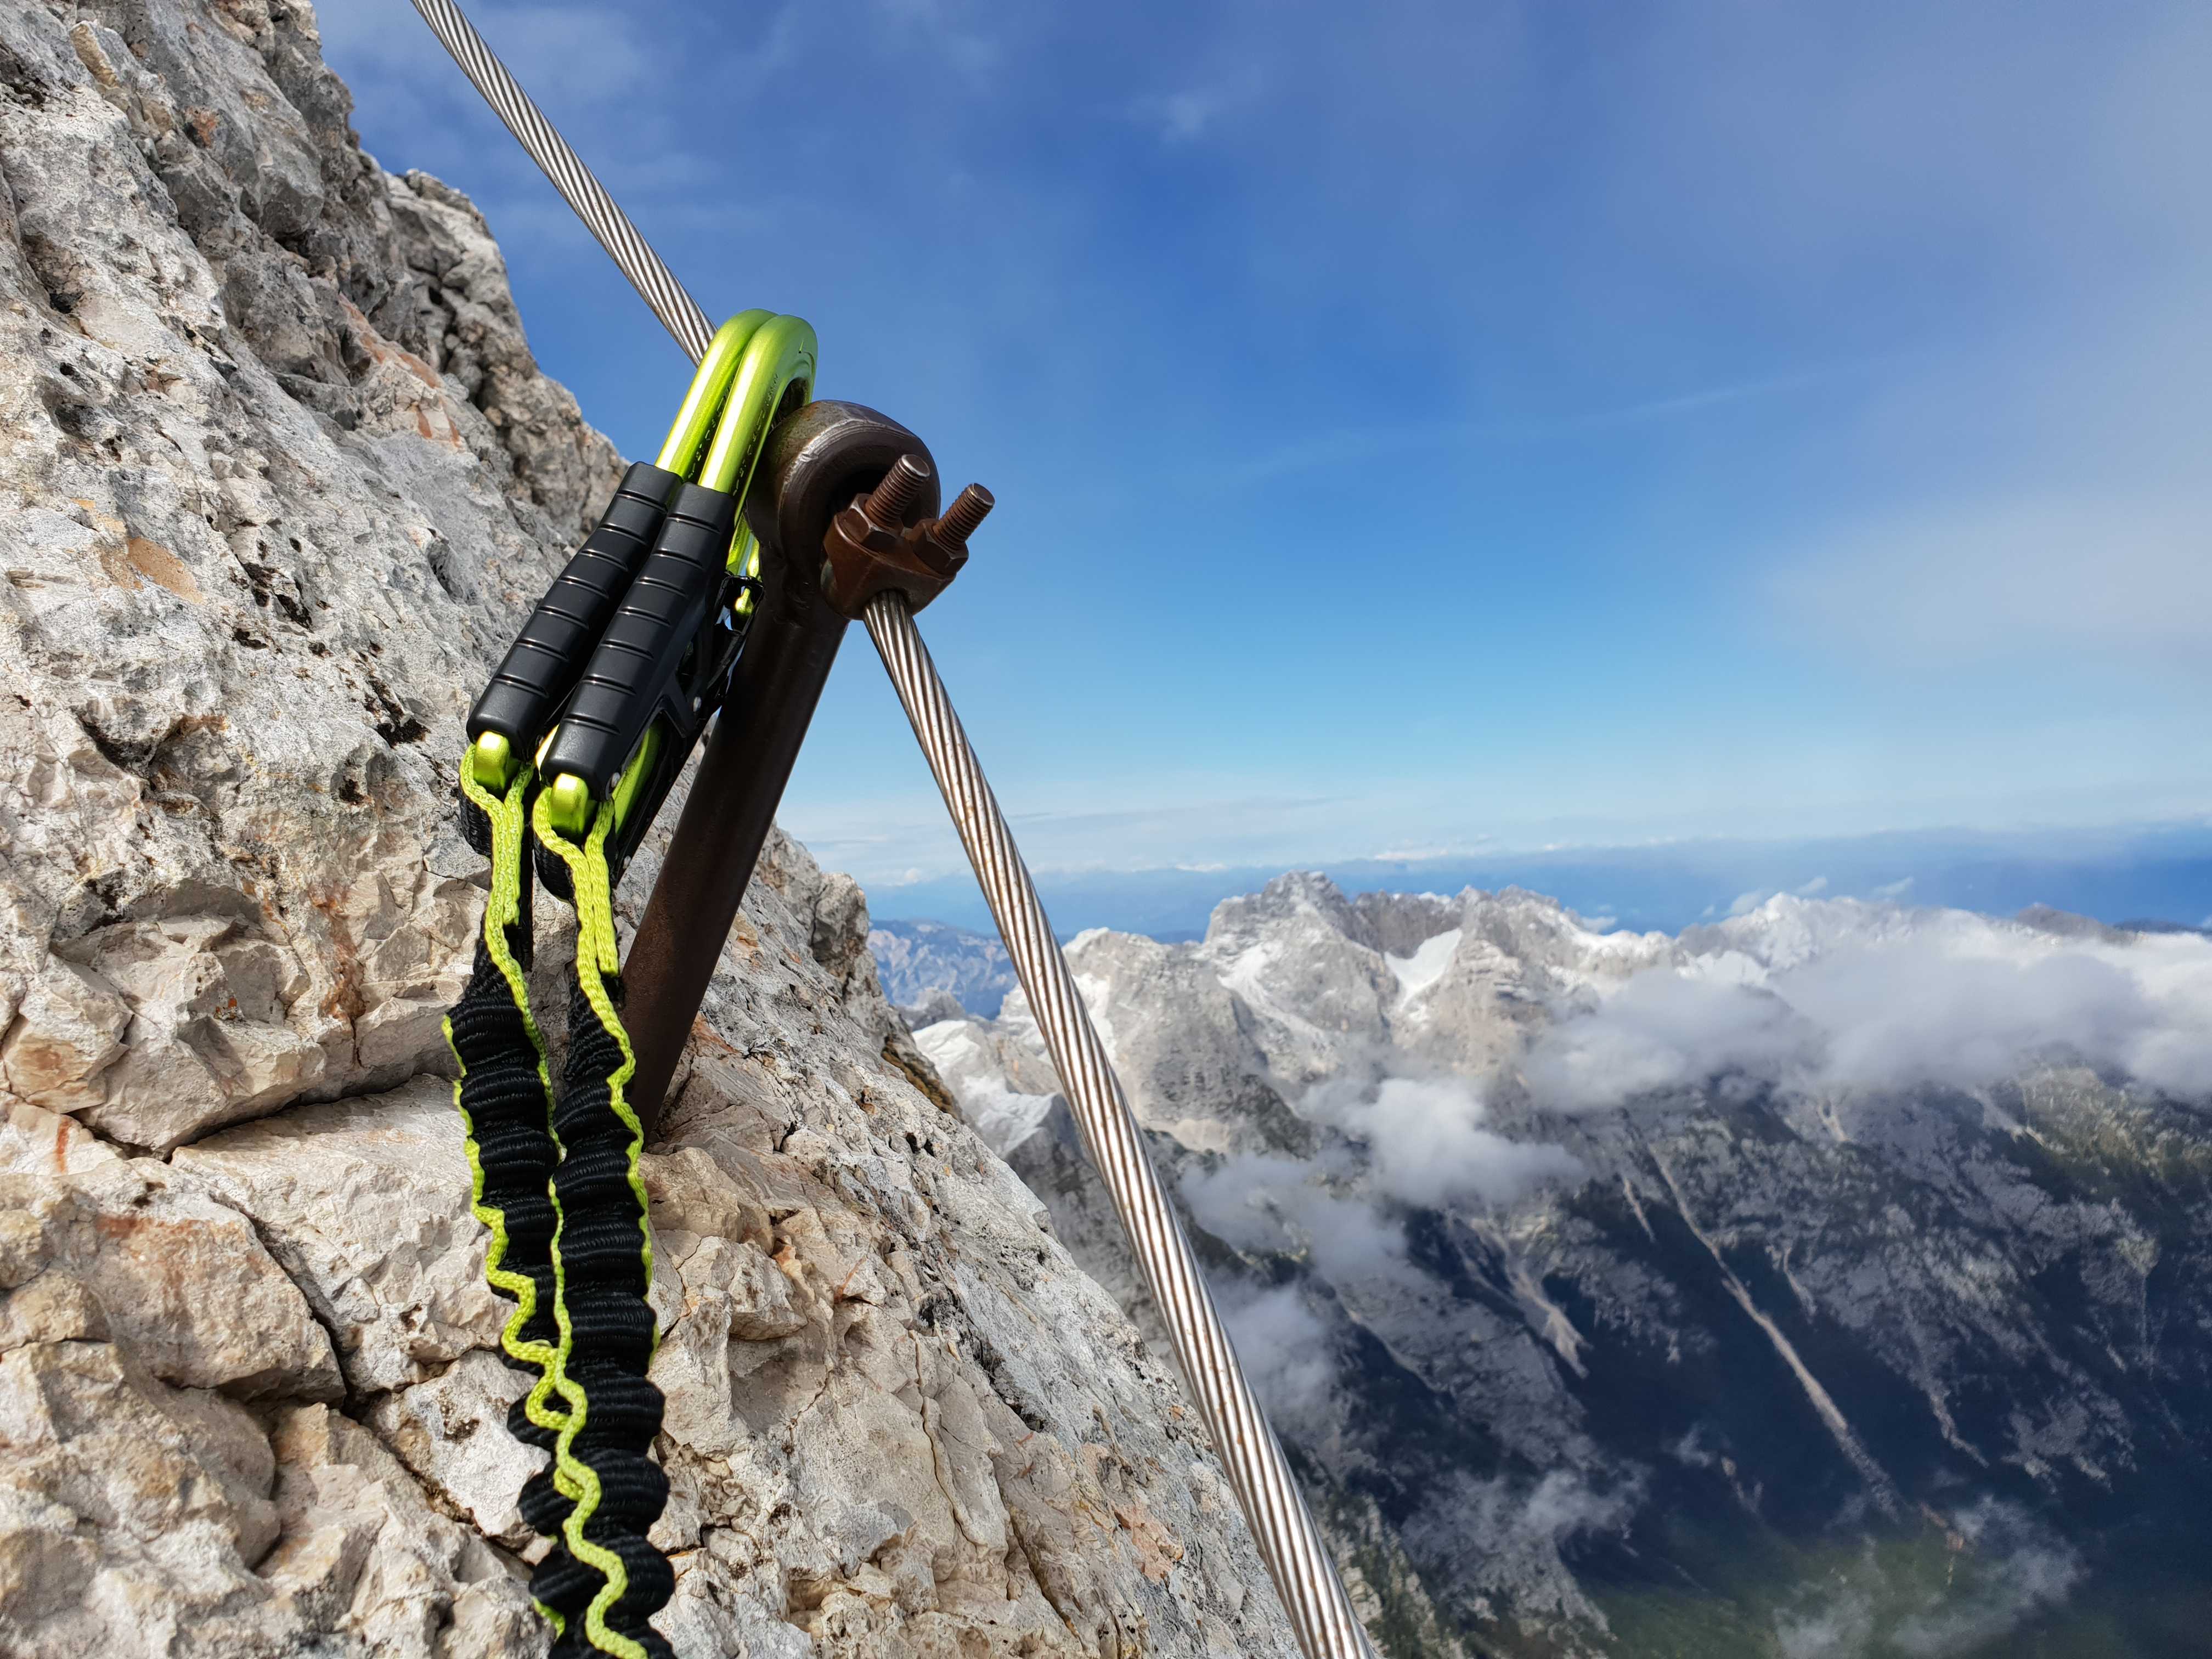 The via ferrata cable is broken up into sections, attached by metal spikes